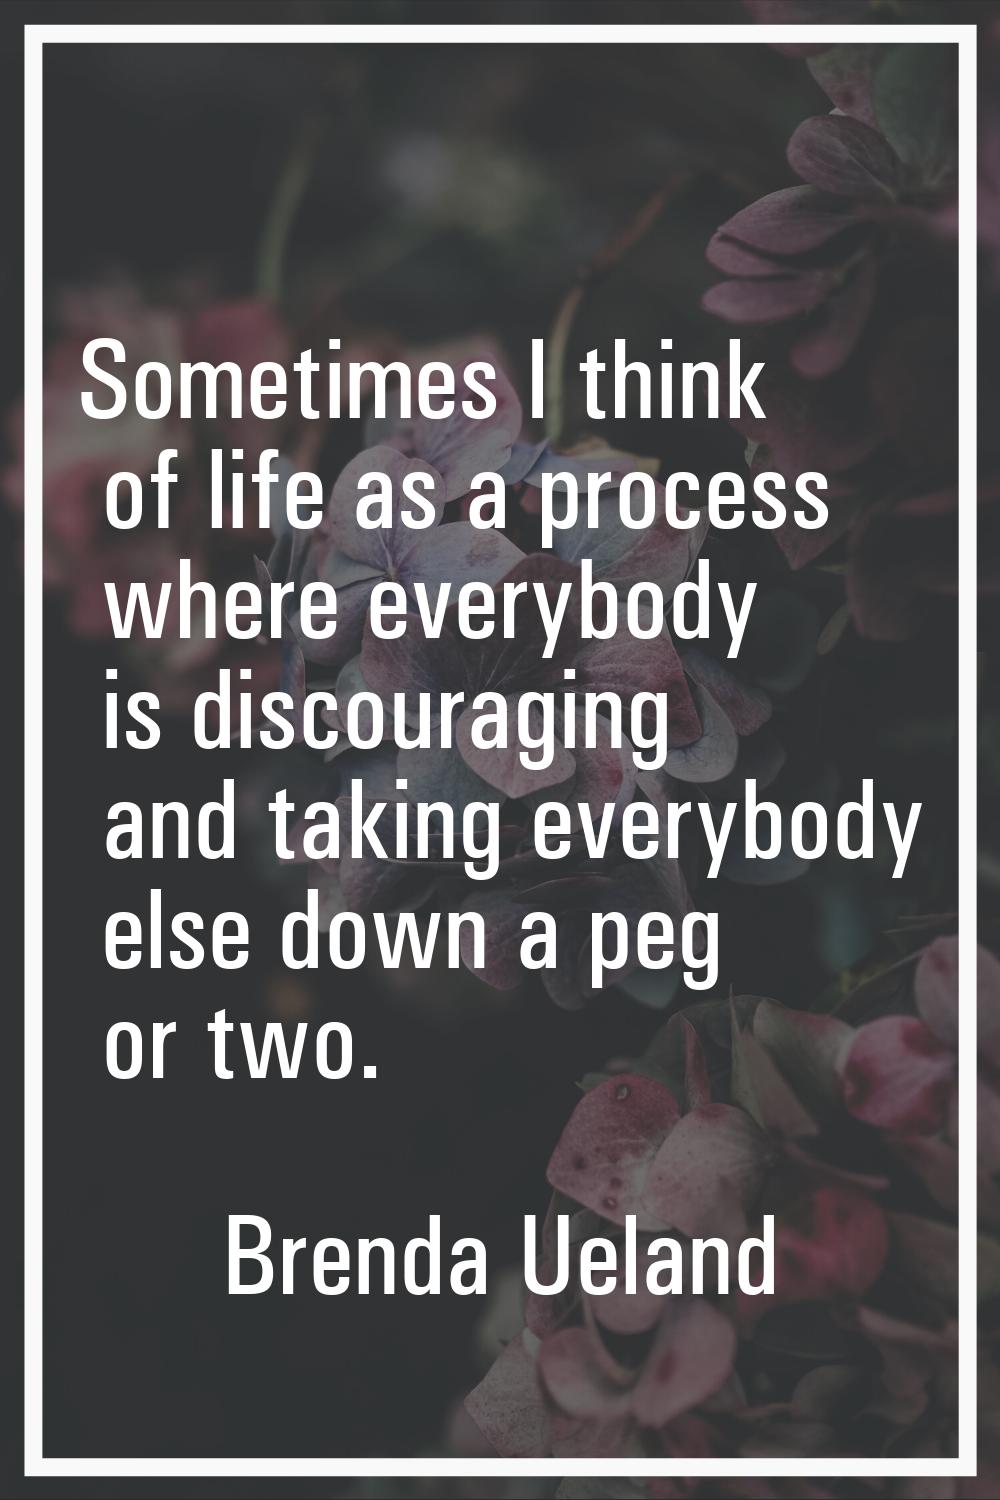 Sometimes I think of life as a process where everybody is discouraging and taking everybody else do